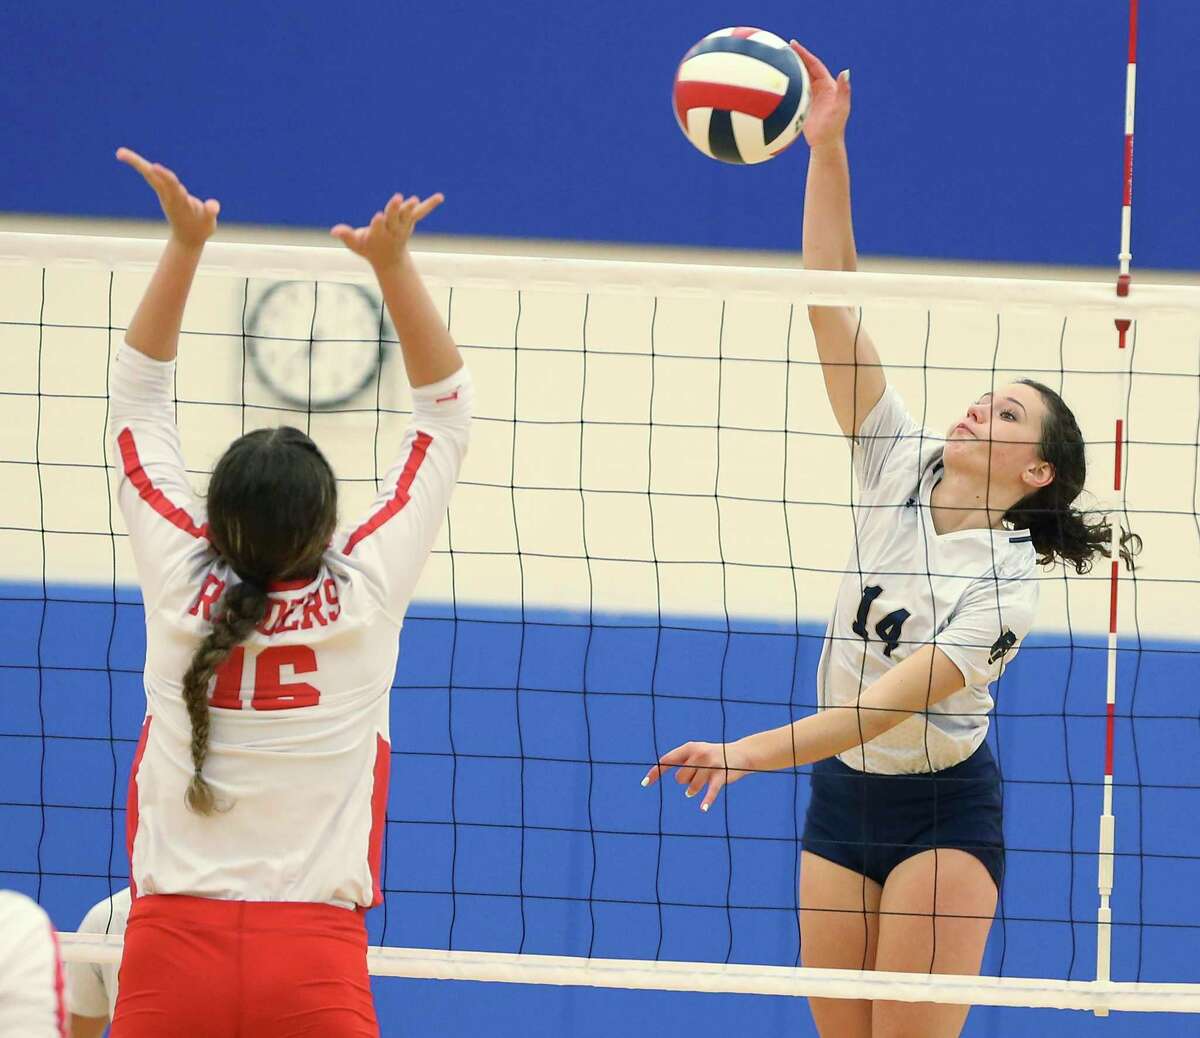 O’Connor’s Mackenzie Mahr (14) attempts to score against Taft’s Alondra Acevedo (16) in girls volleyball at Harlan Gym on Tuesday, Sept. 21, 2021. O’Connor swept Taft, 3-0 in sets, to earn the win. Mahr recorded a game high 14 kills.